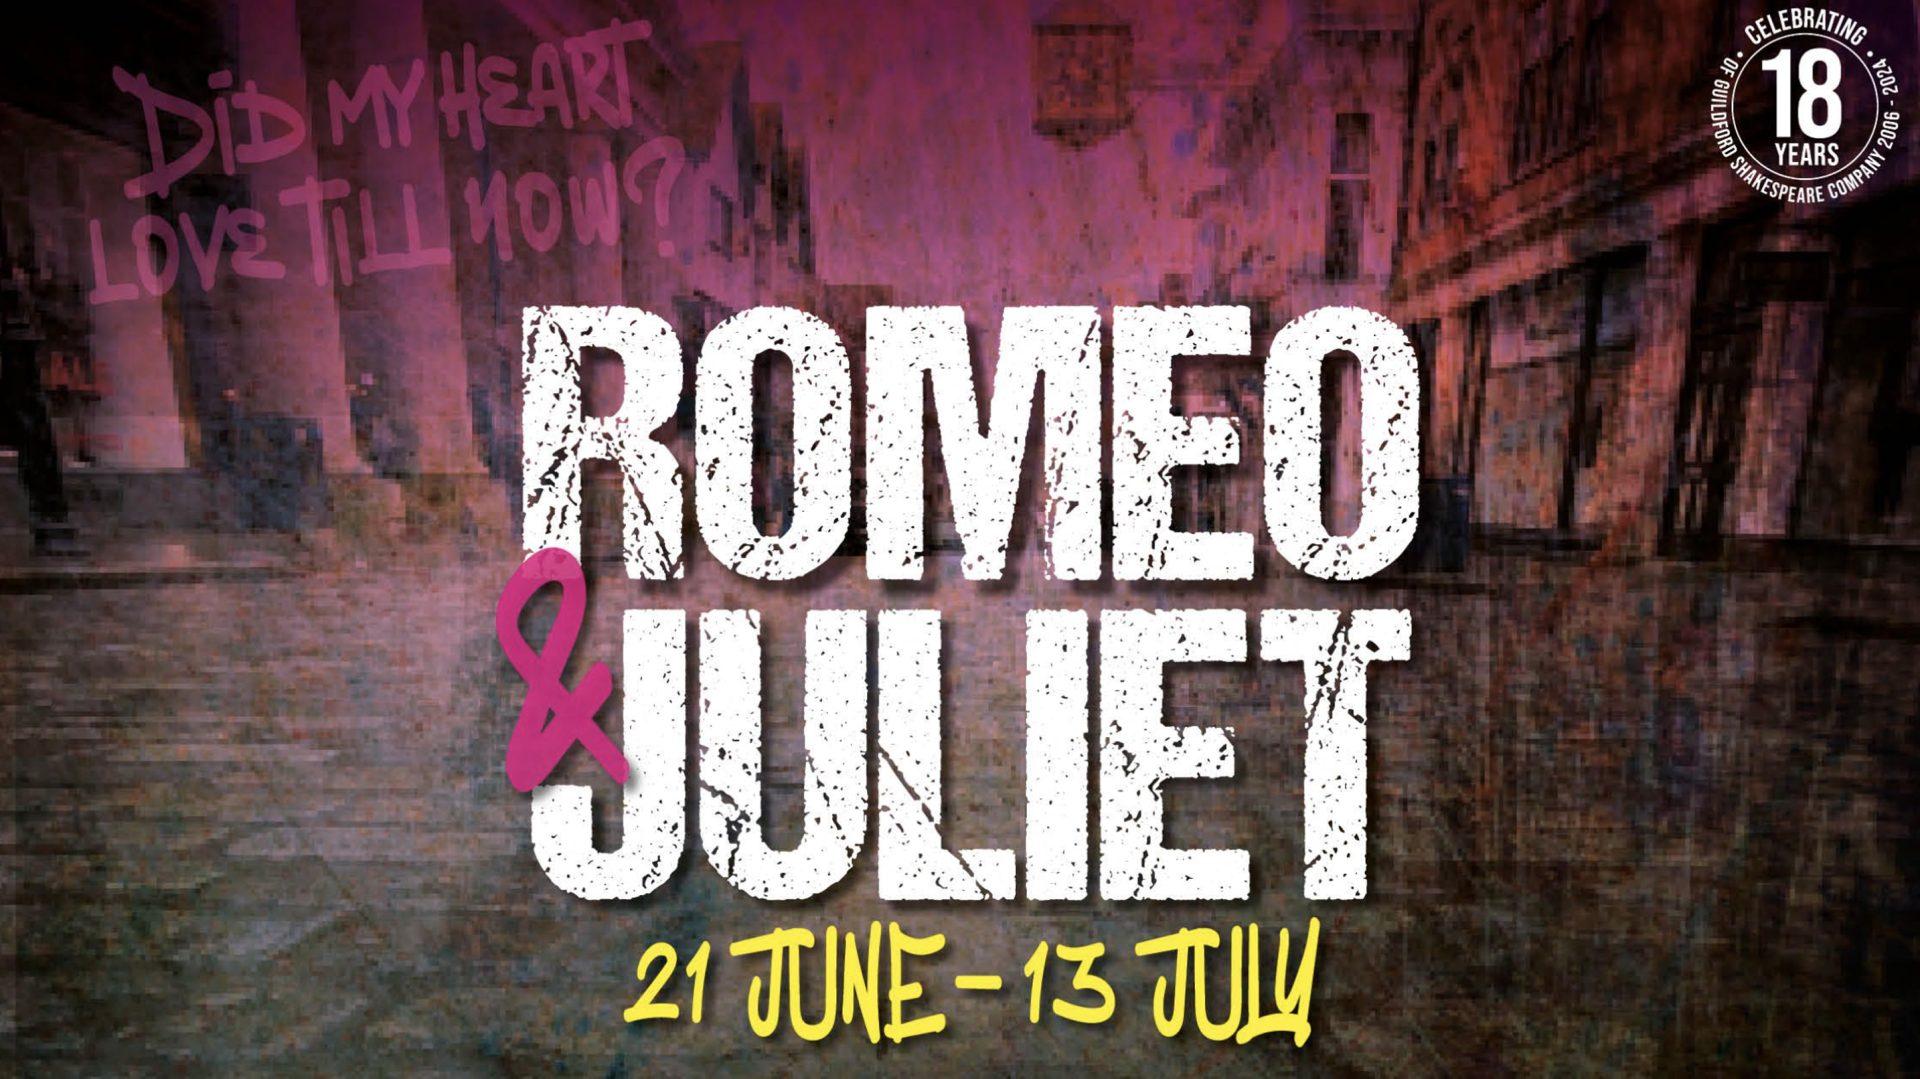 Guildford Shakespeare Company announces stellar cast for its immersive Romeo & Juliet!